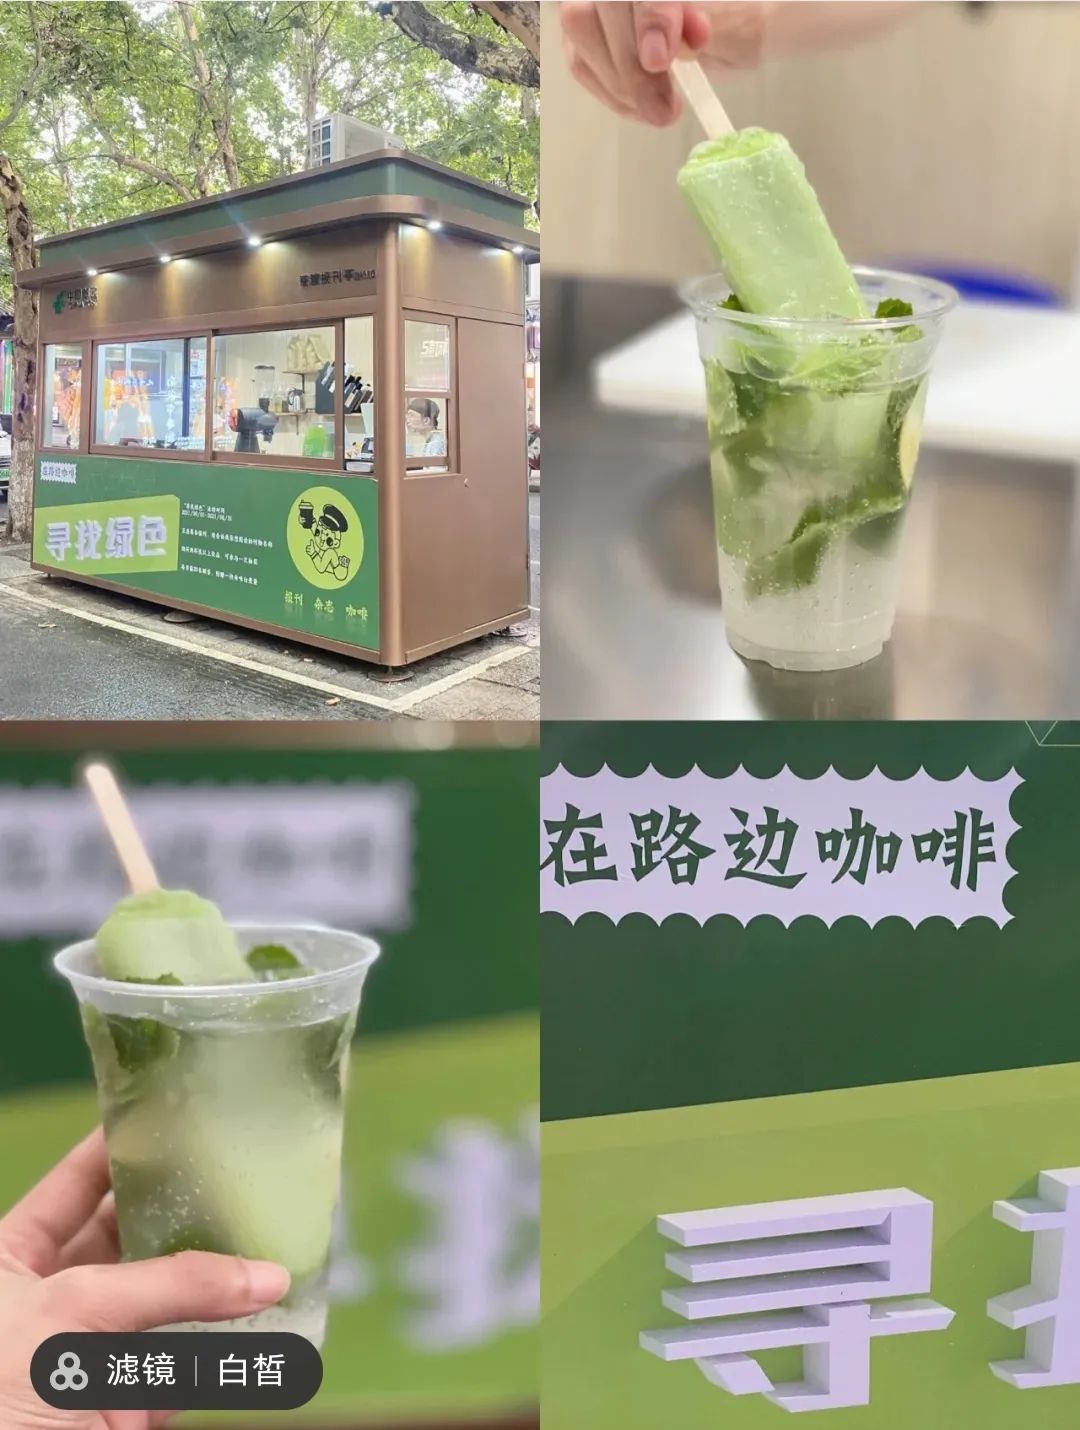 Two newspaper kiosks in Hangzhou have been transformed into cafes. Is the special coffee delicious in summer?